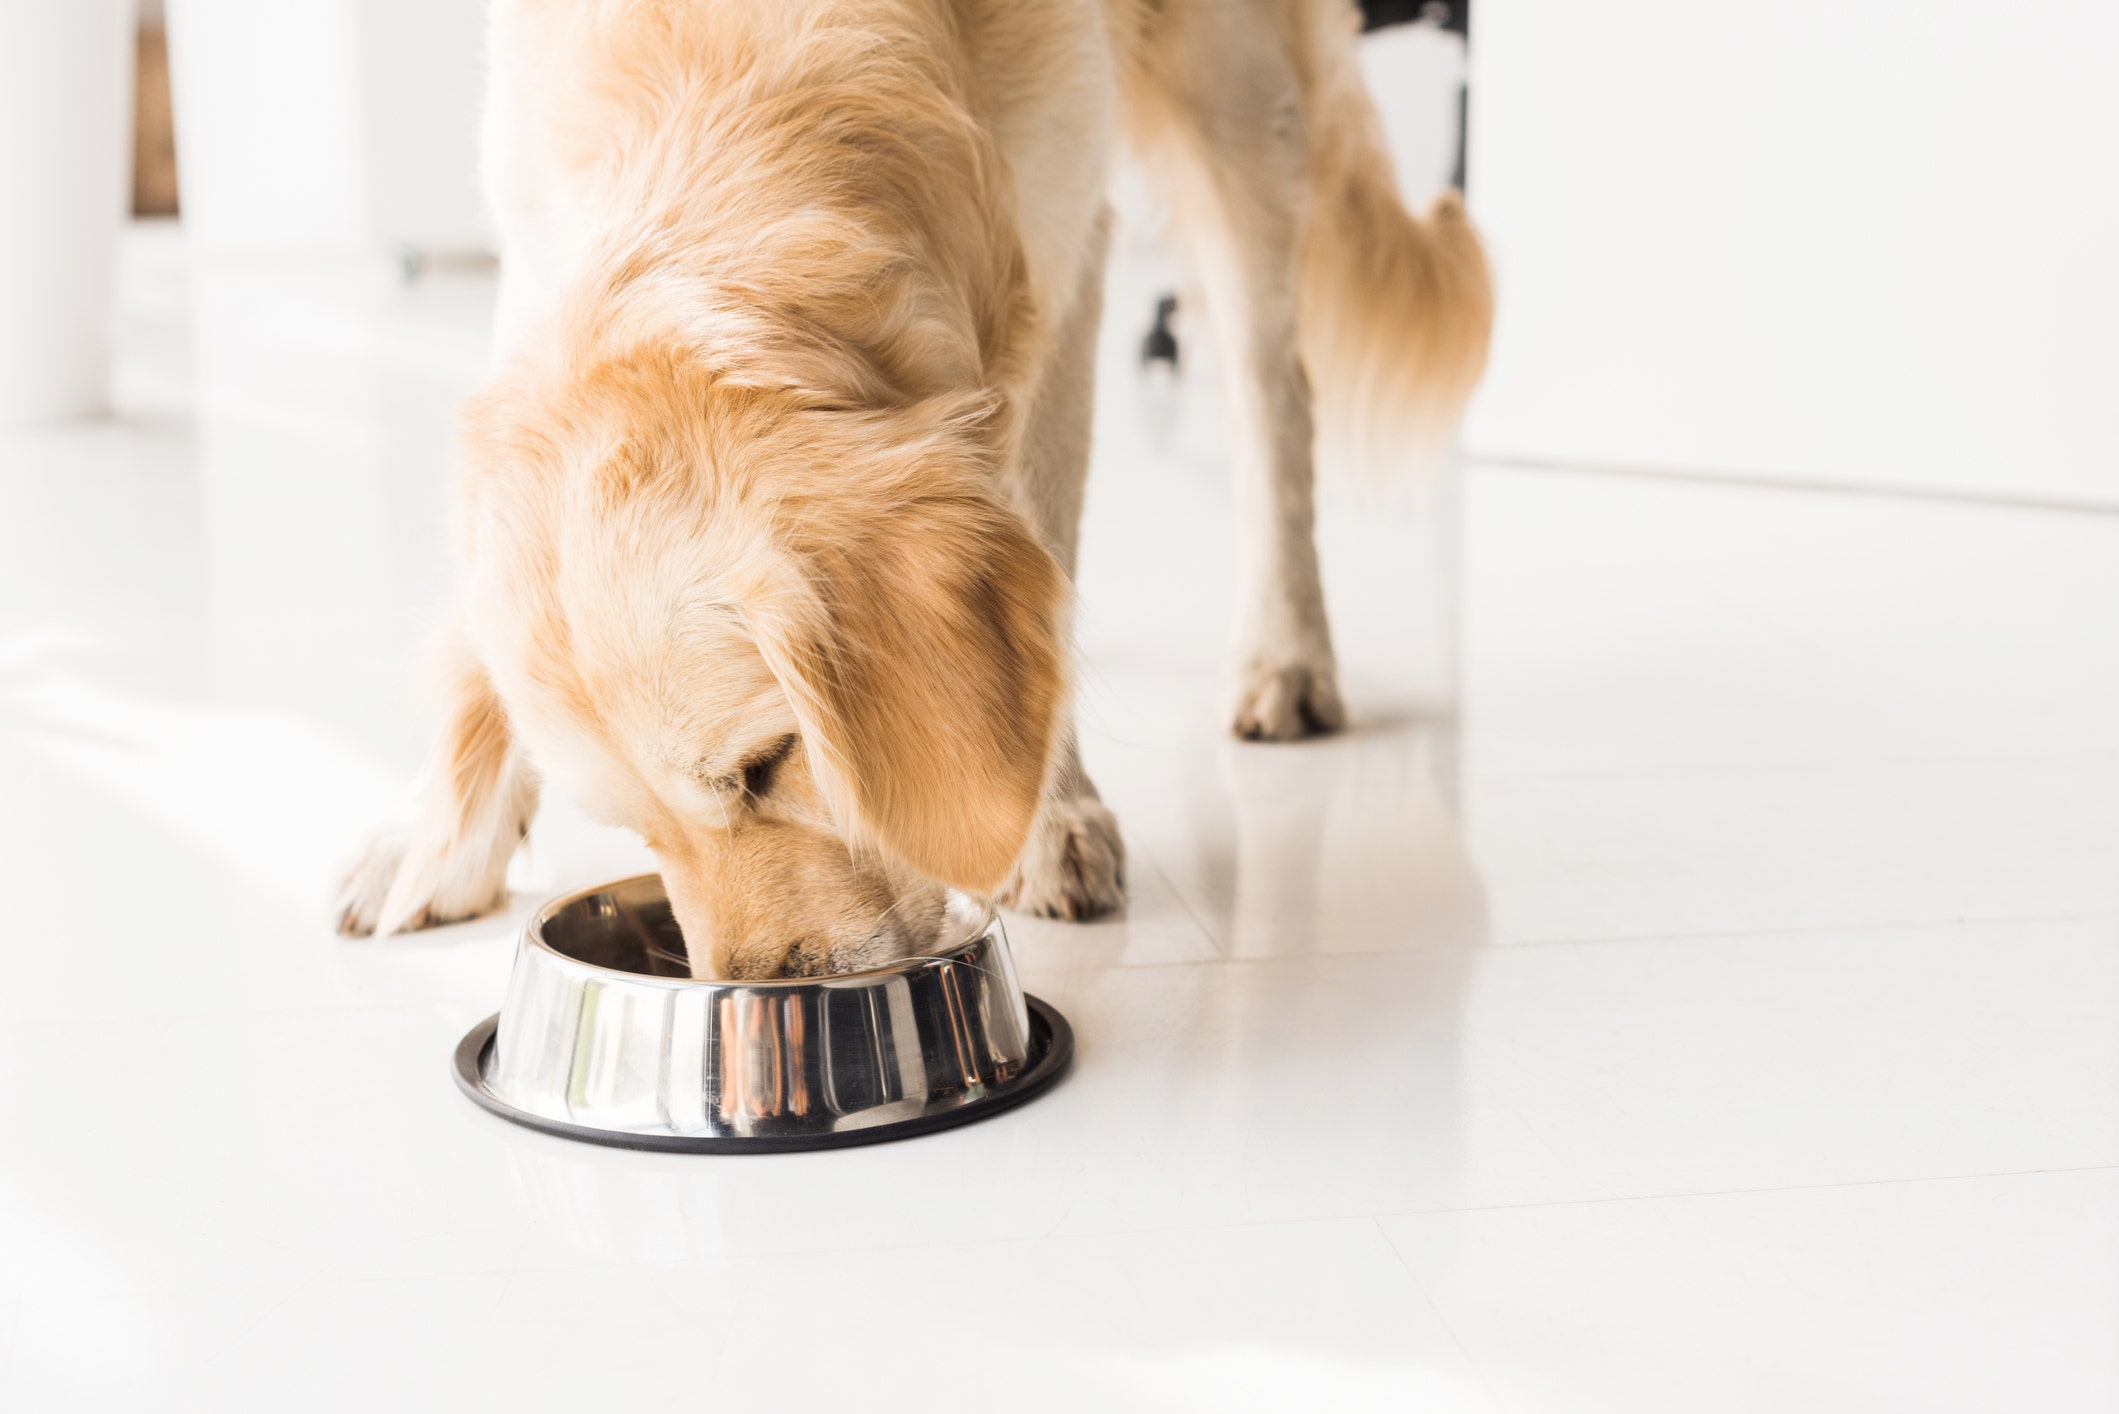 Purina sells insect-based dog, cat food to be more eco-friendly